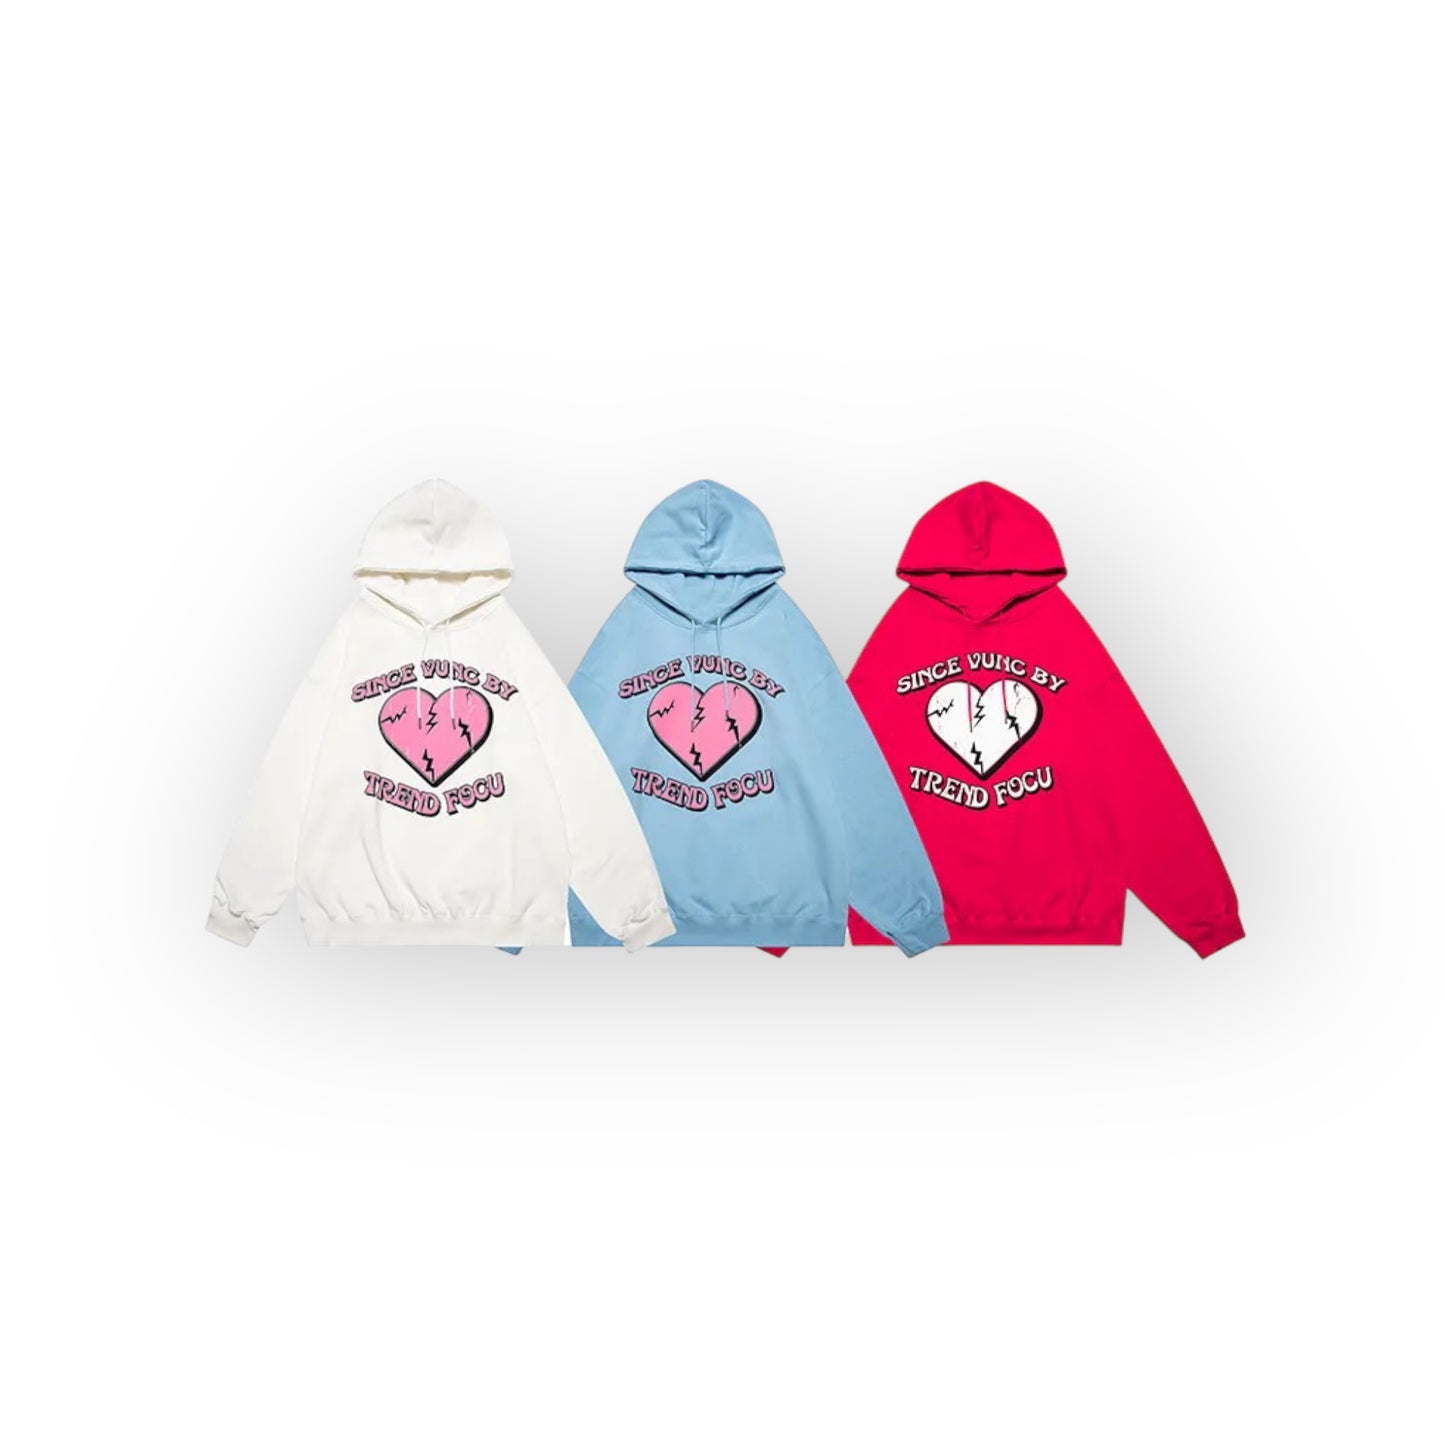 Aolamegs Cracked Heart Graphic Letter Print Hoodies